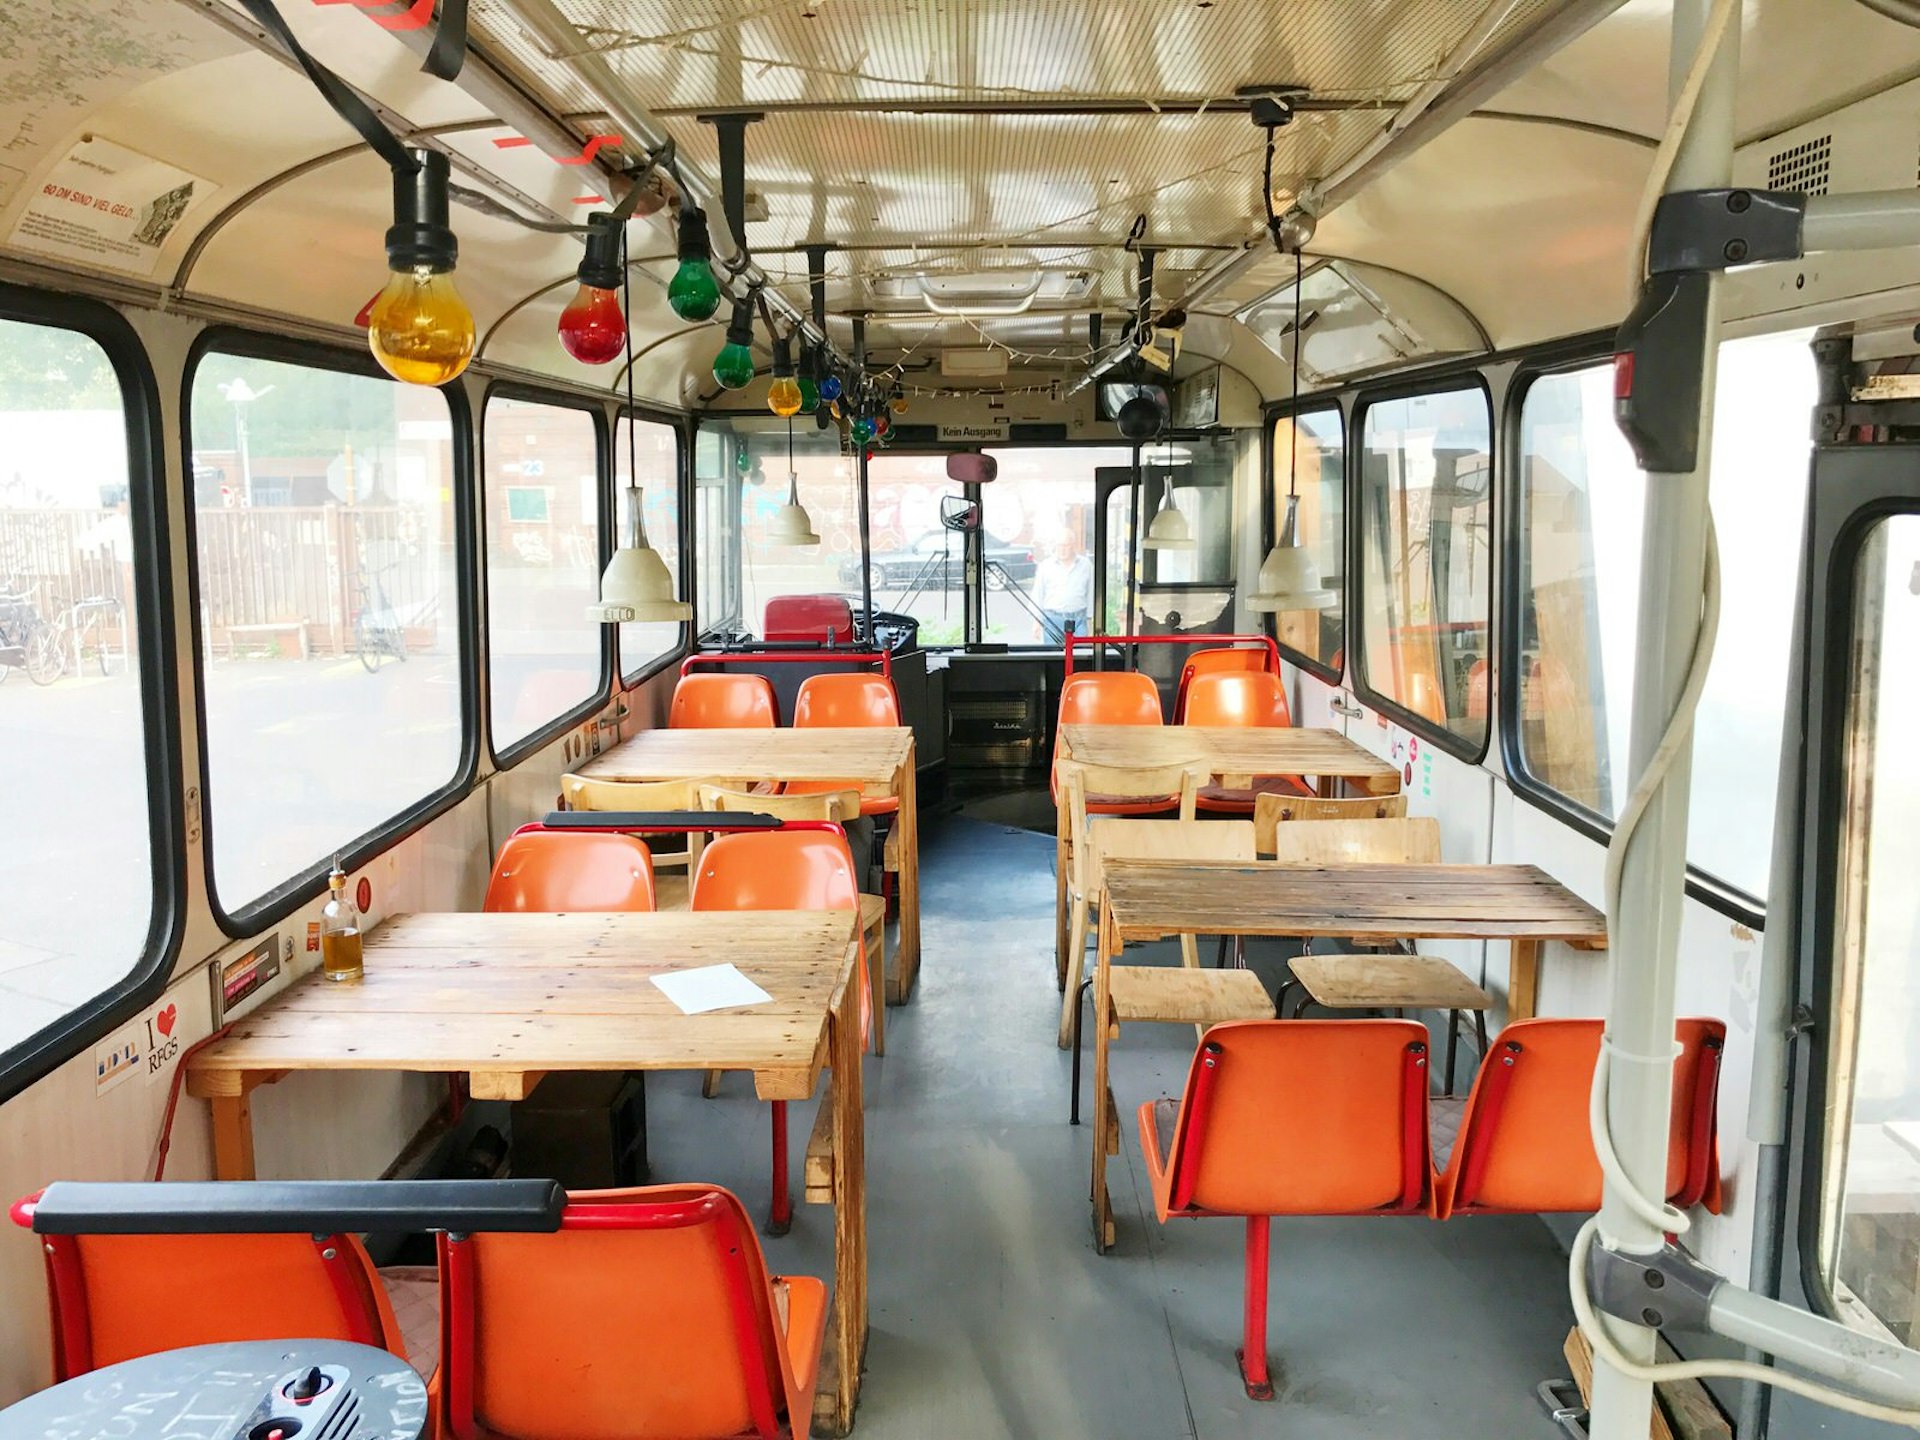 The inside of one of Cafe Pförtner's dining spots on a converted bus. The bus has been refitted with wooden tables, orange school chairs and colourful fairy lights © Jennifer Sojka / Lonely Planet